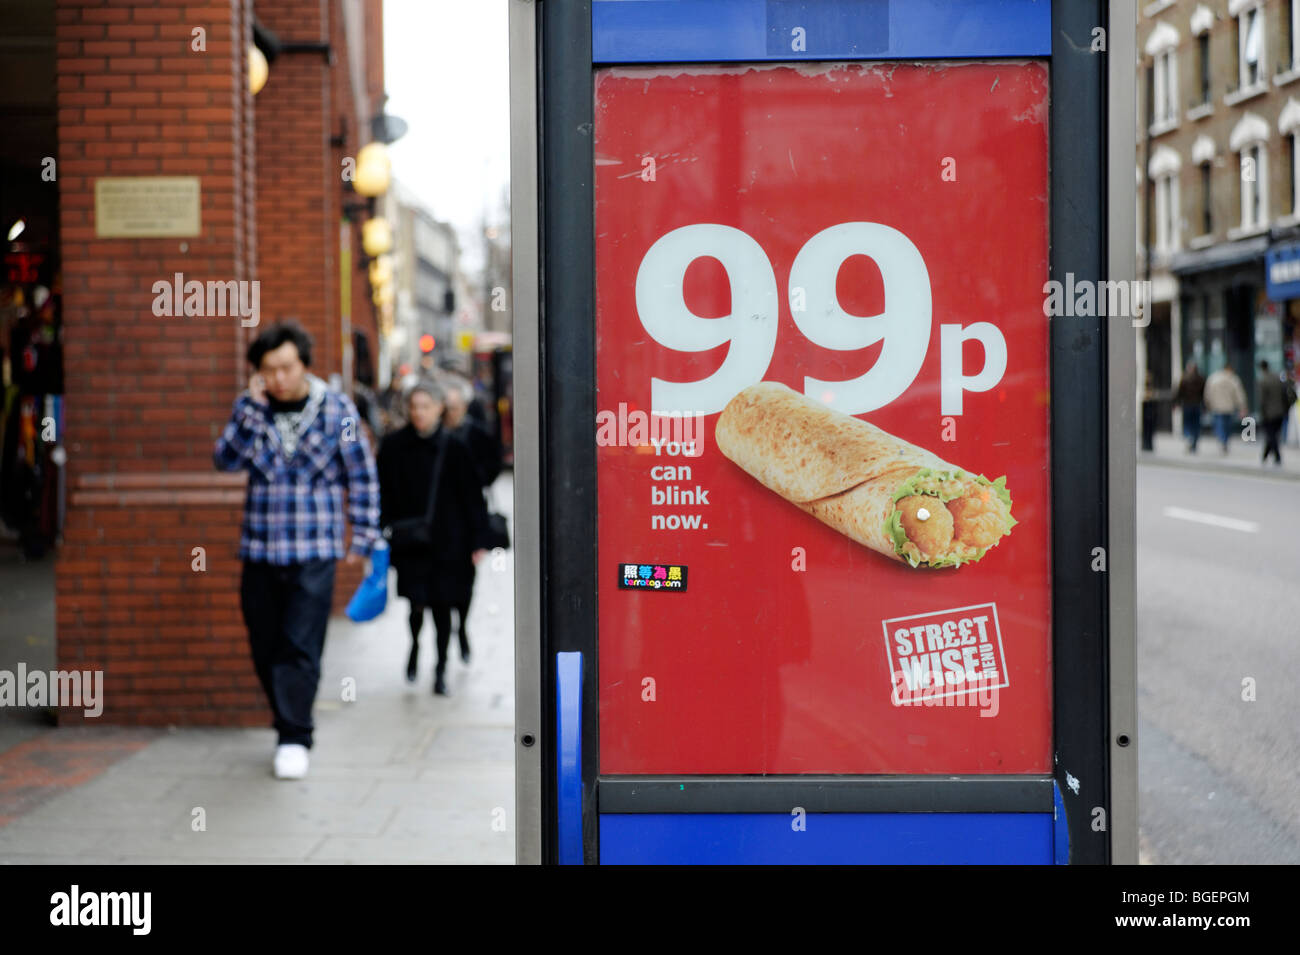 Advertising for 99p cheap meal deal by high street take-away. London. UK 2009 Stock Photo